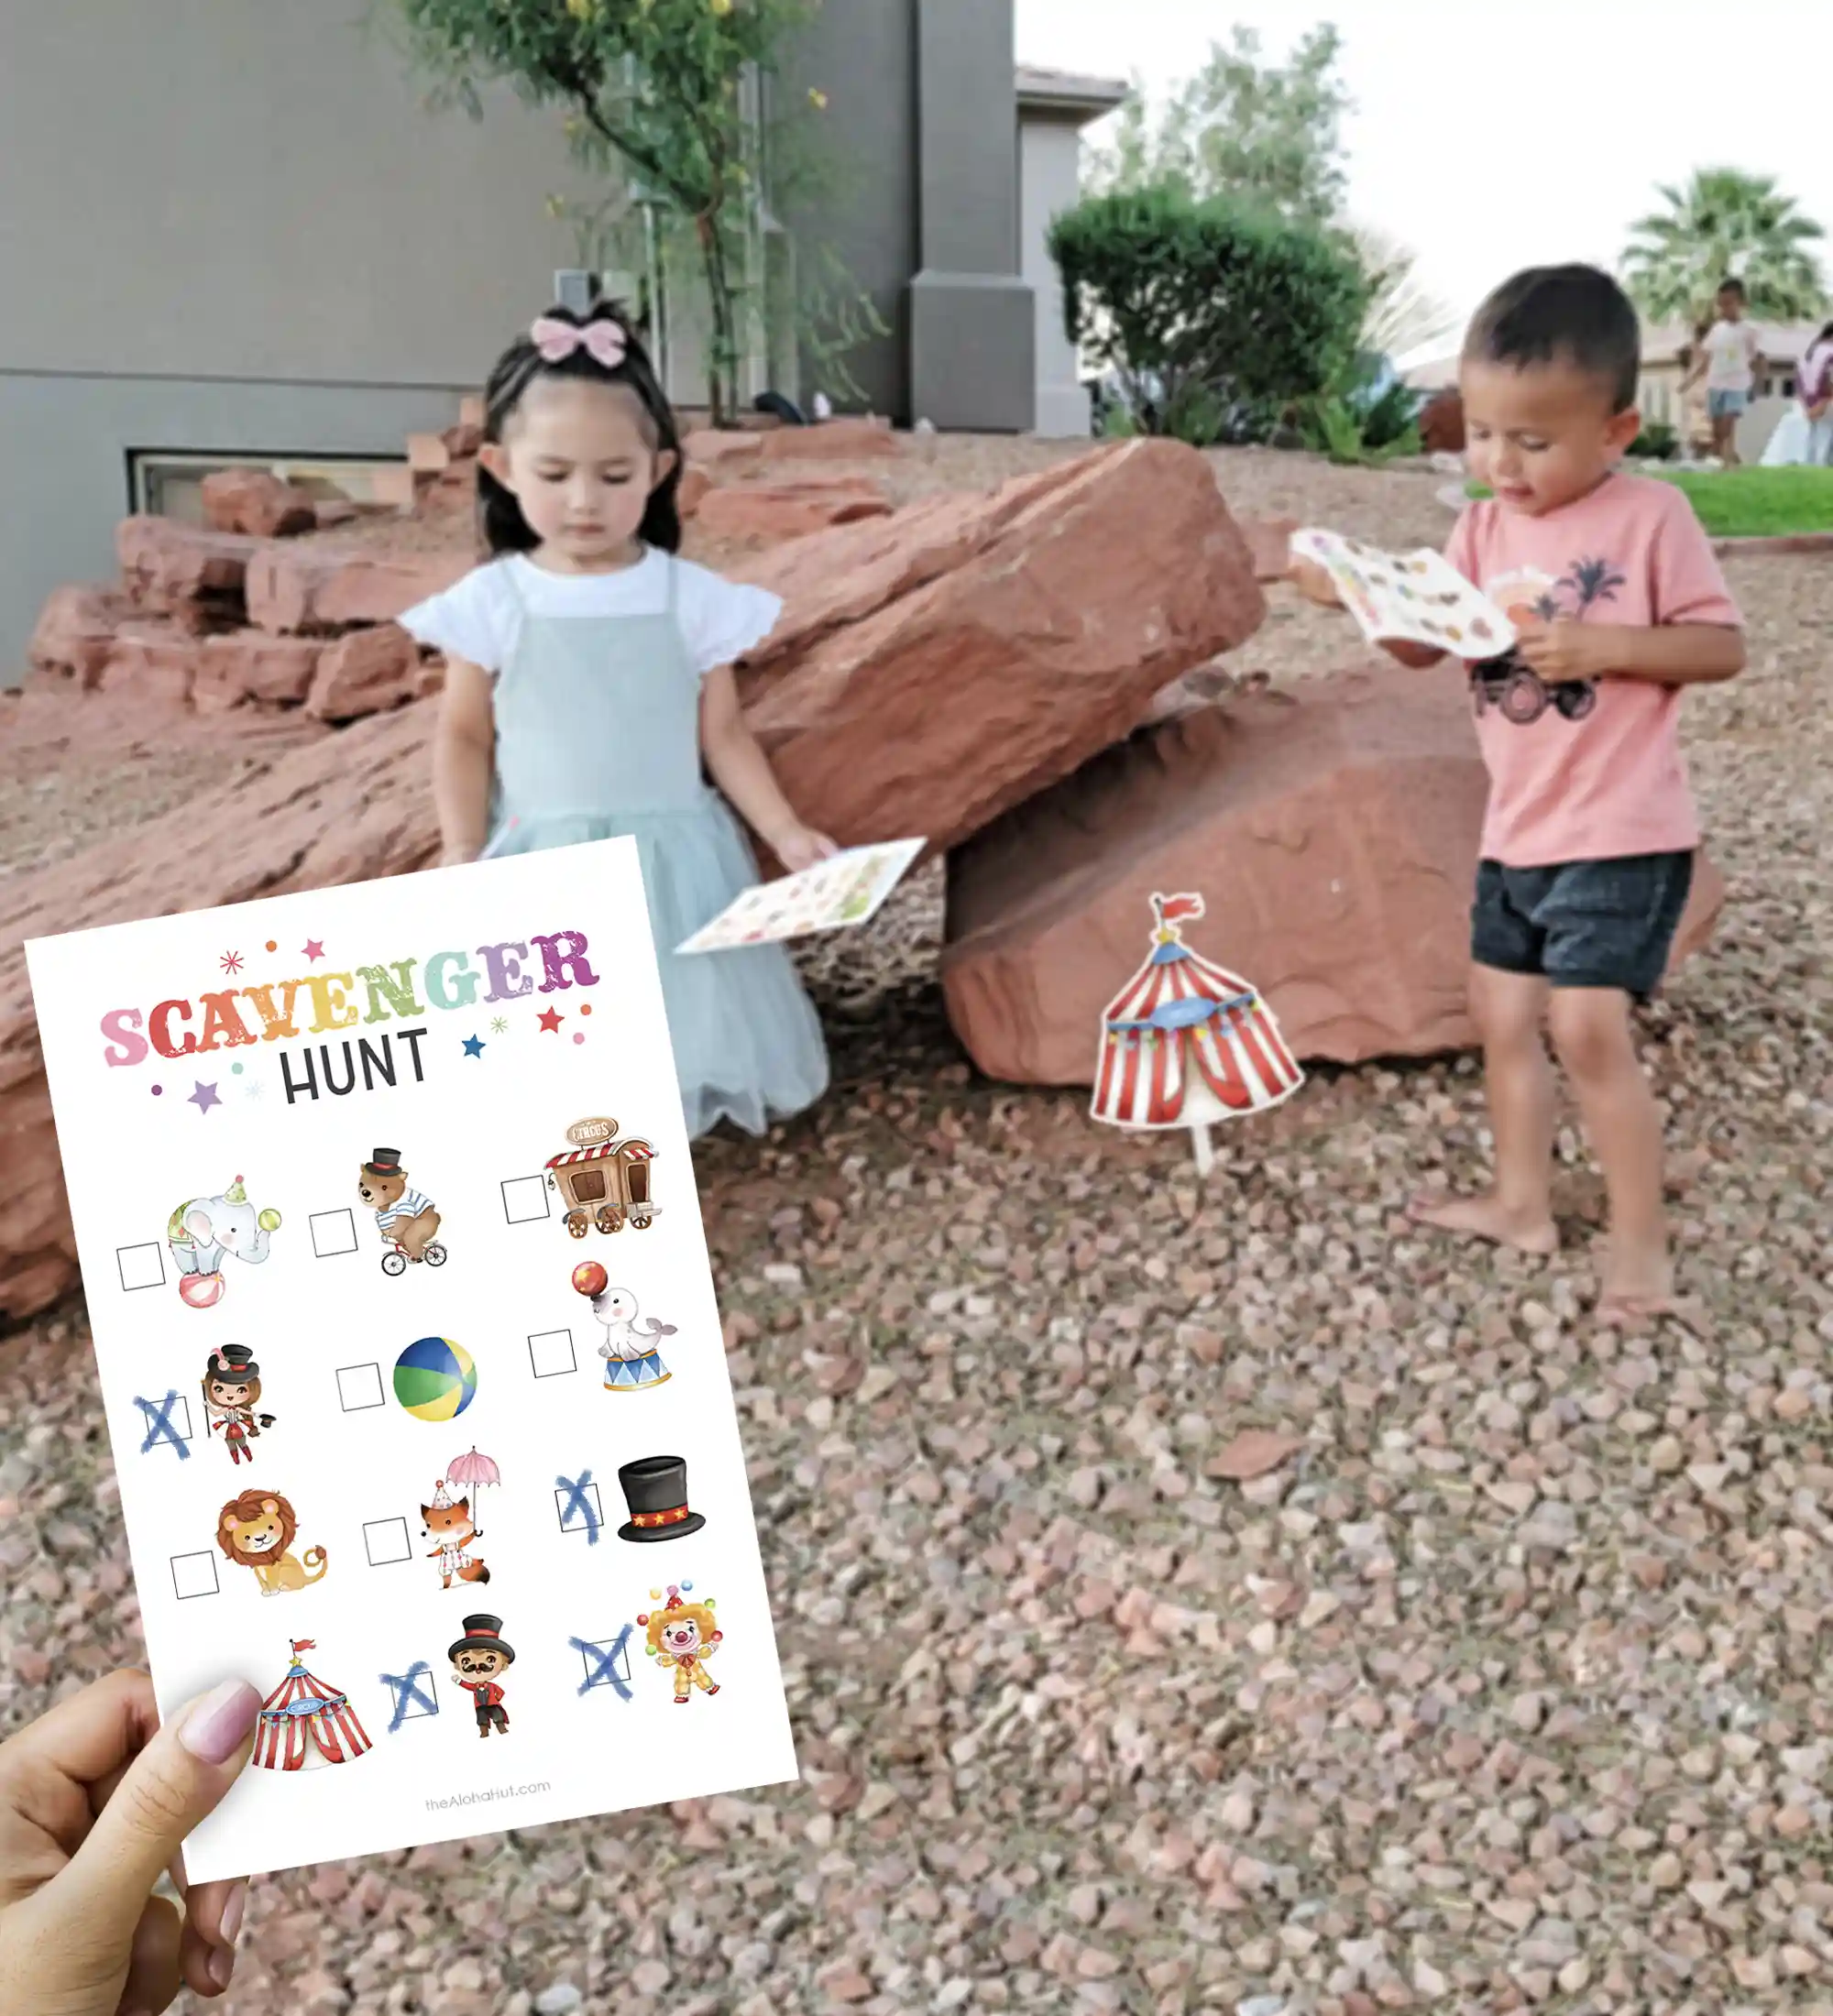 Scavenger hunt game for carnival party or circus party. Get the printable characters and instructions for playing in our shop. Easy to set up and fun to play. Cheap carnival games for your party.